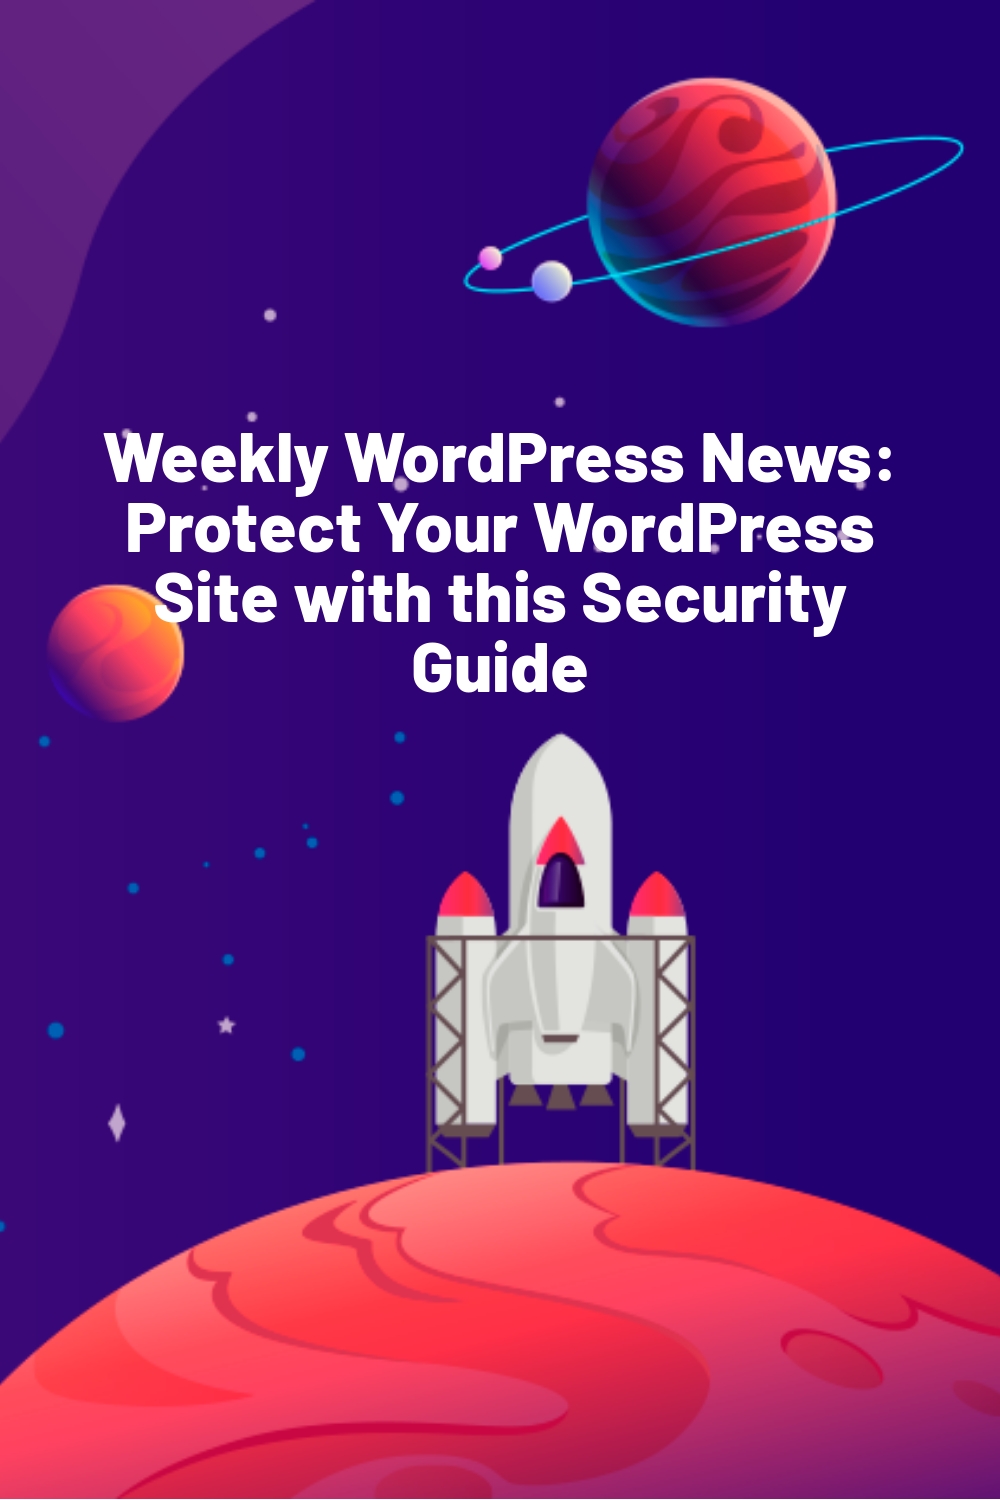 Weekly WordPress News: Protect Your WordPress Site with this Security Guide